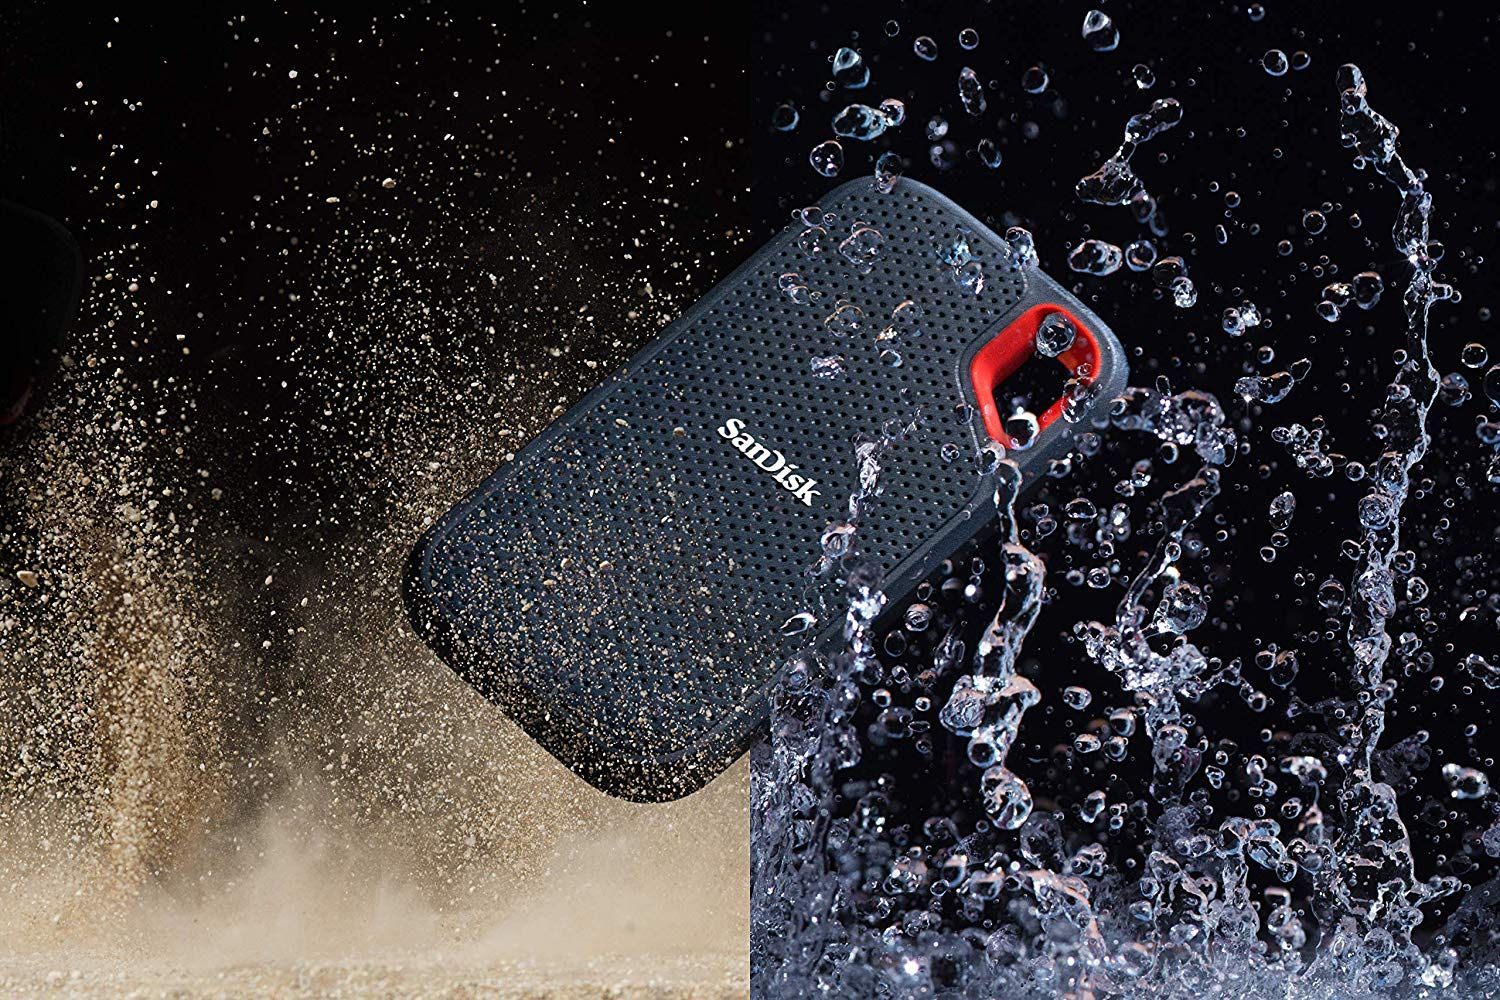 SanDisk's Extreme Pro 1TB Rugged SSD Is Just $110, Saving $68 Today Only -  CNET